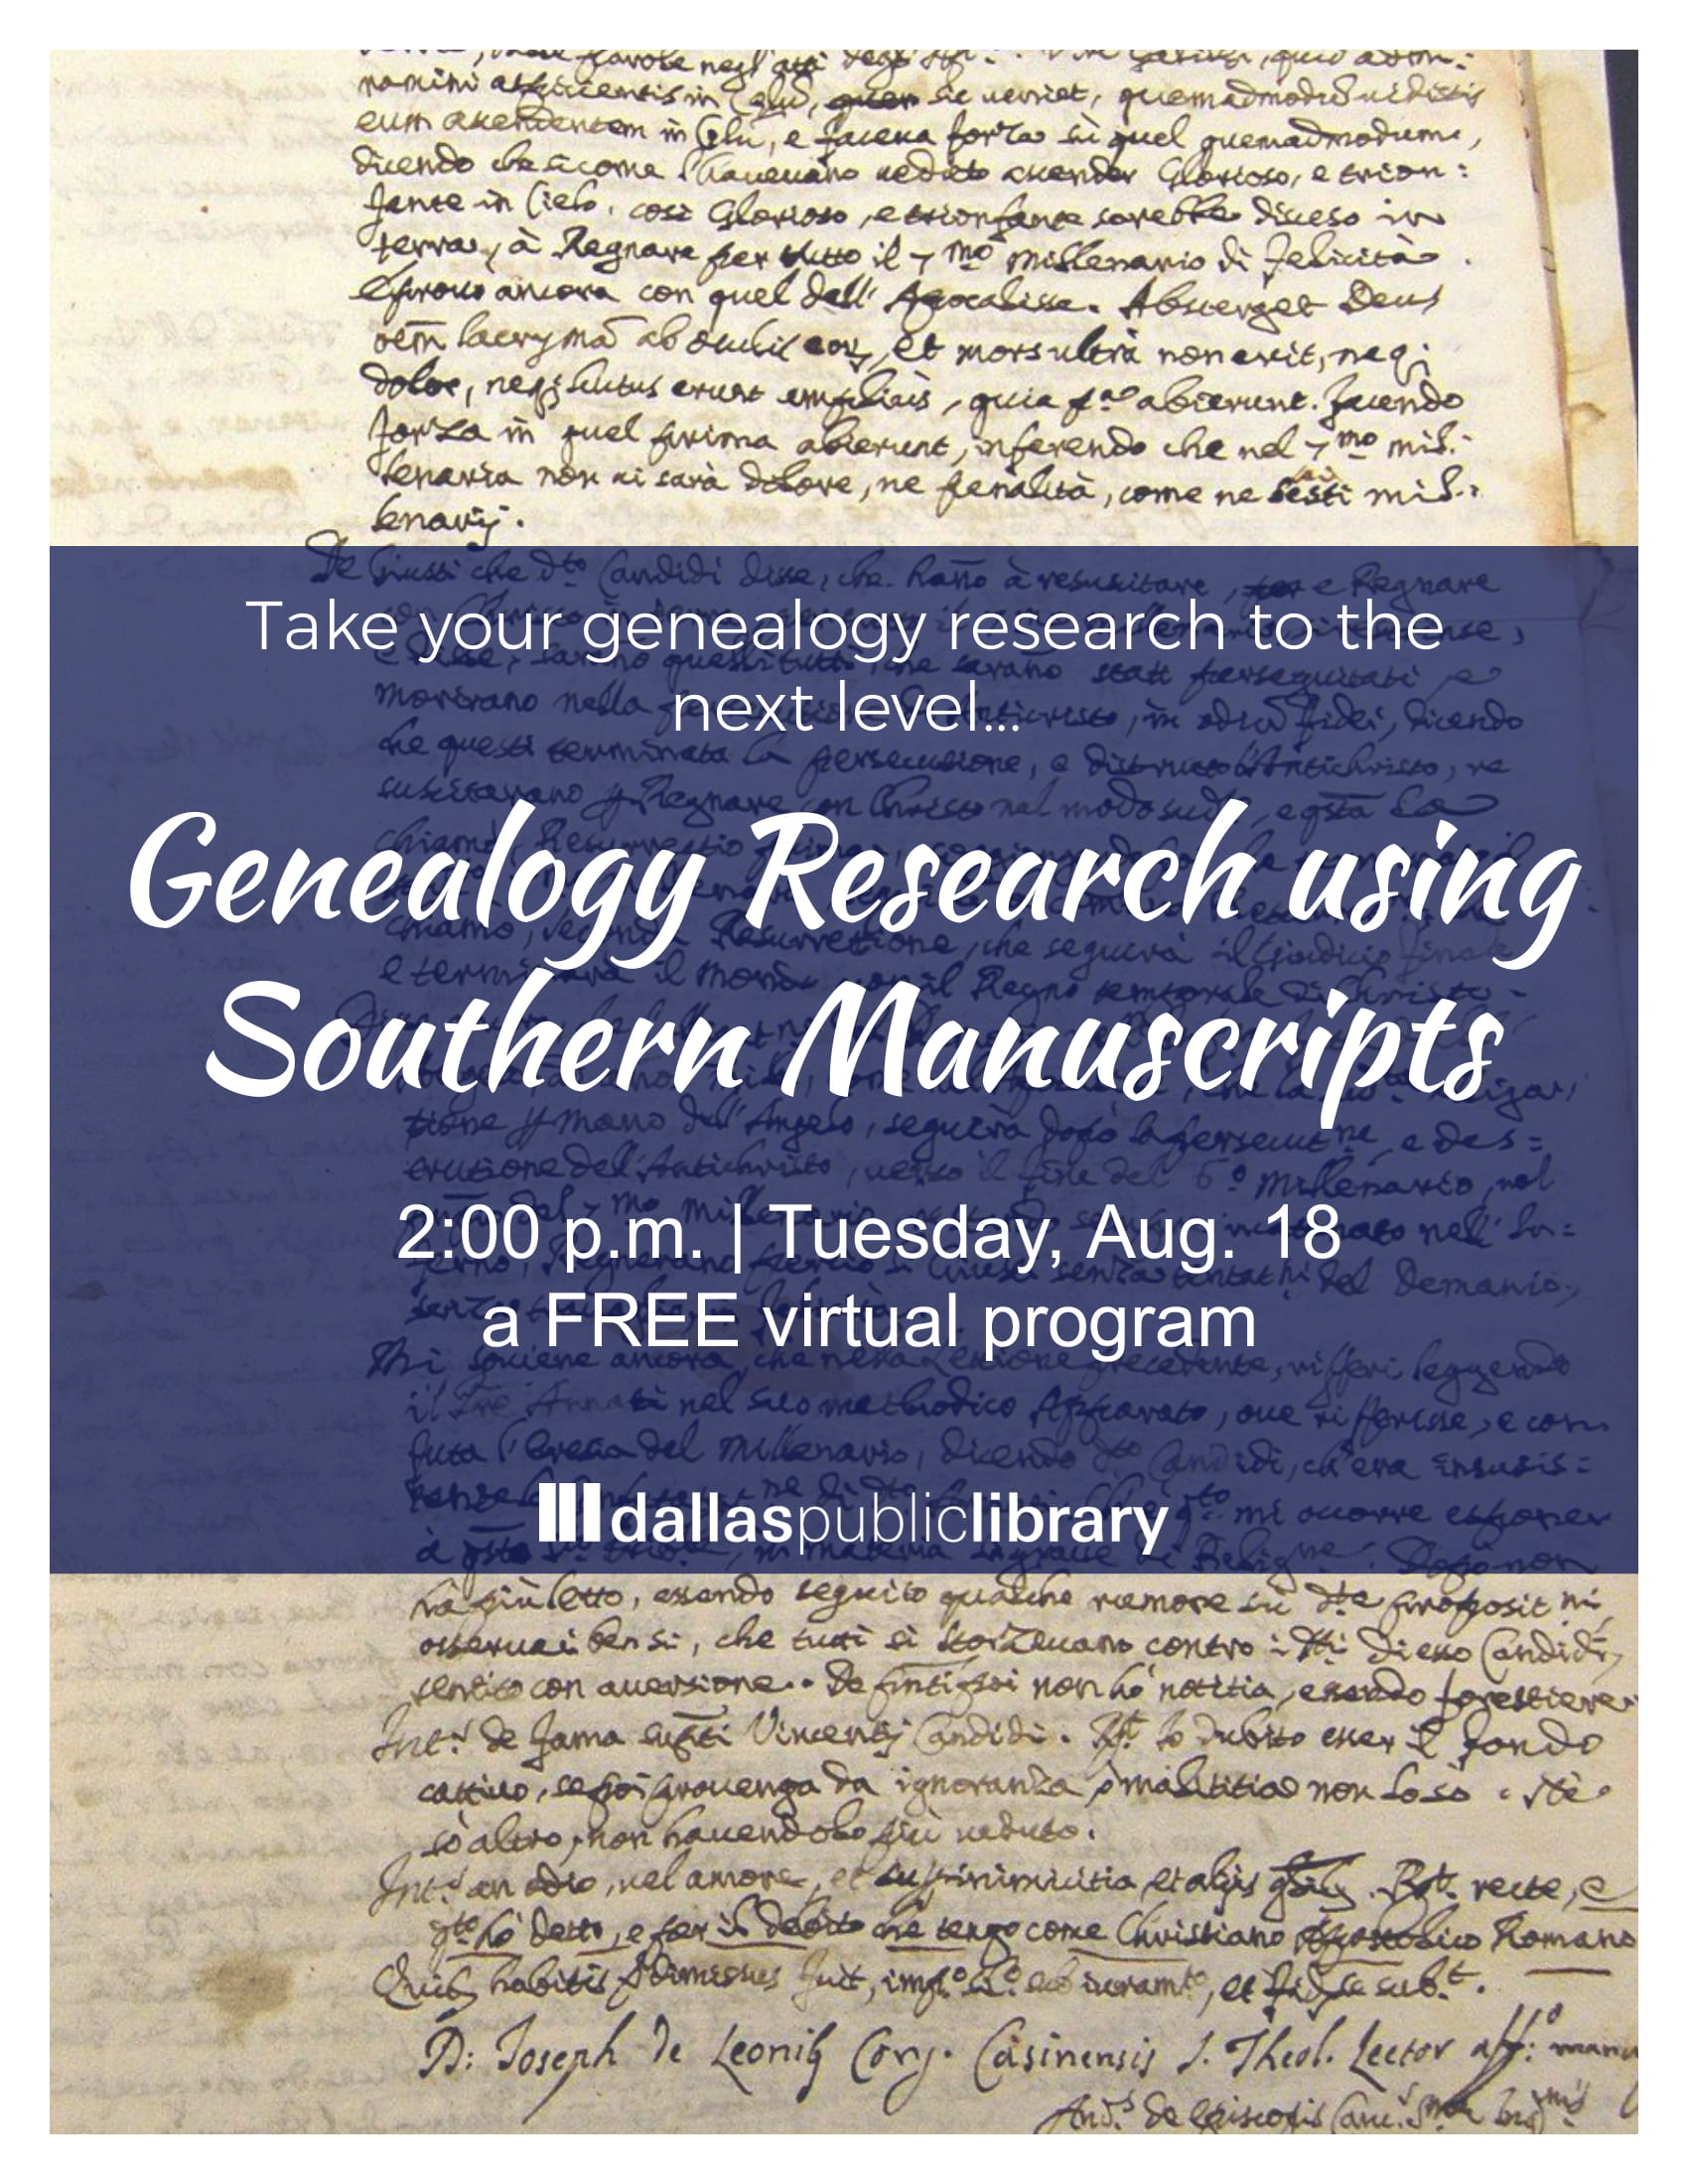 Genealogy Research using Southern Manuscripts